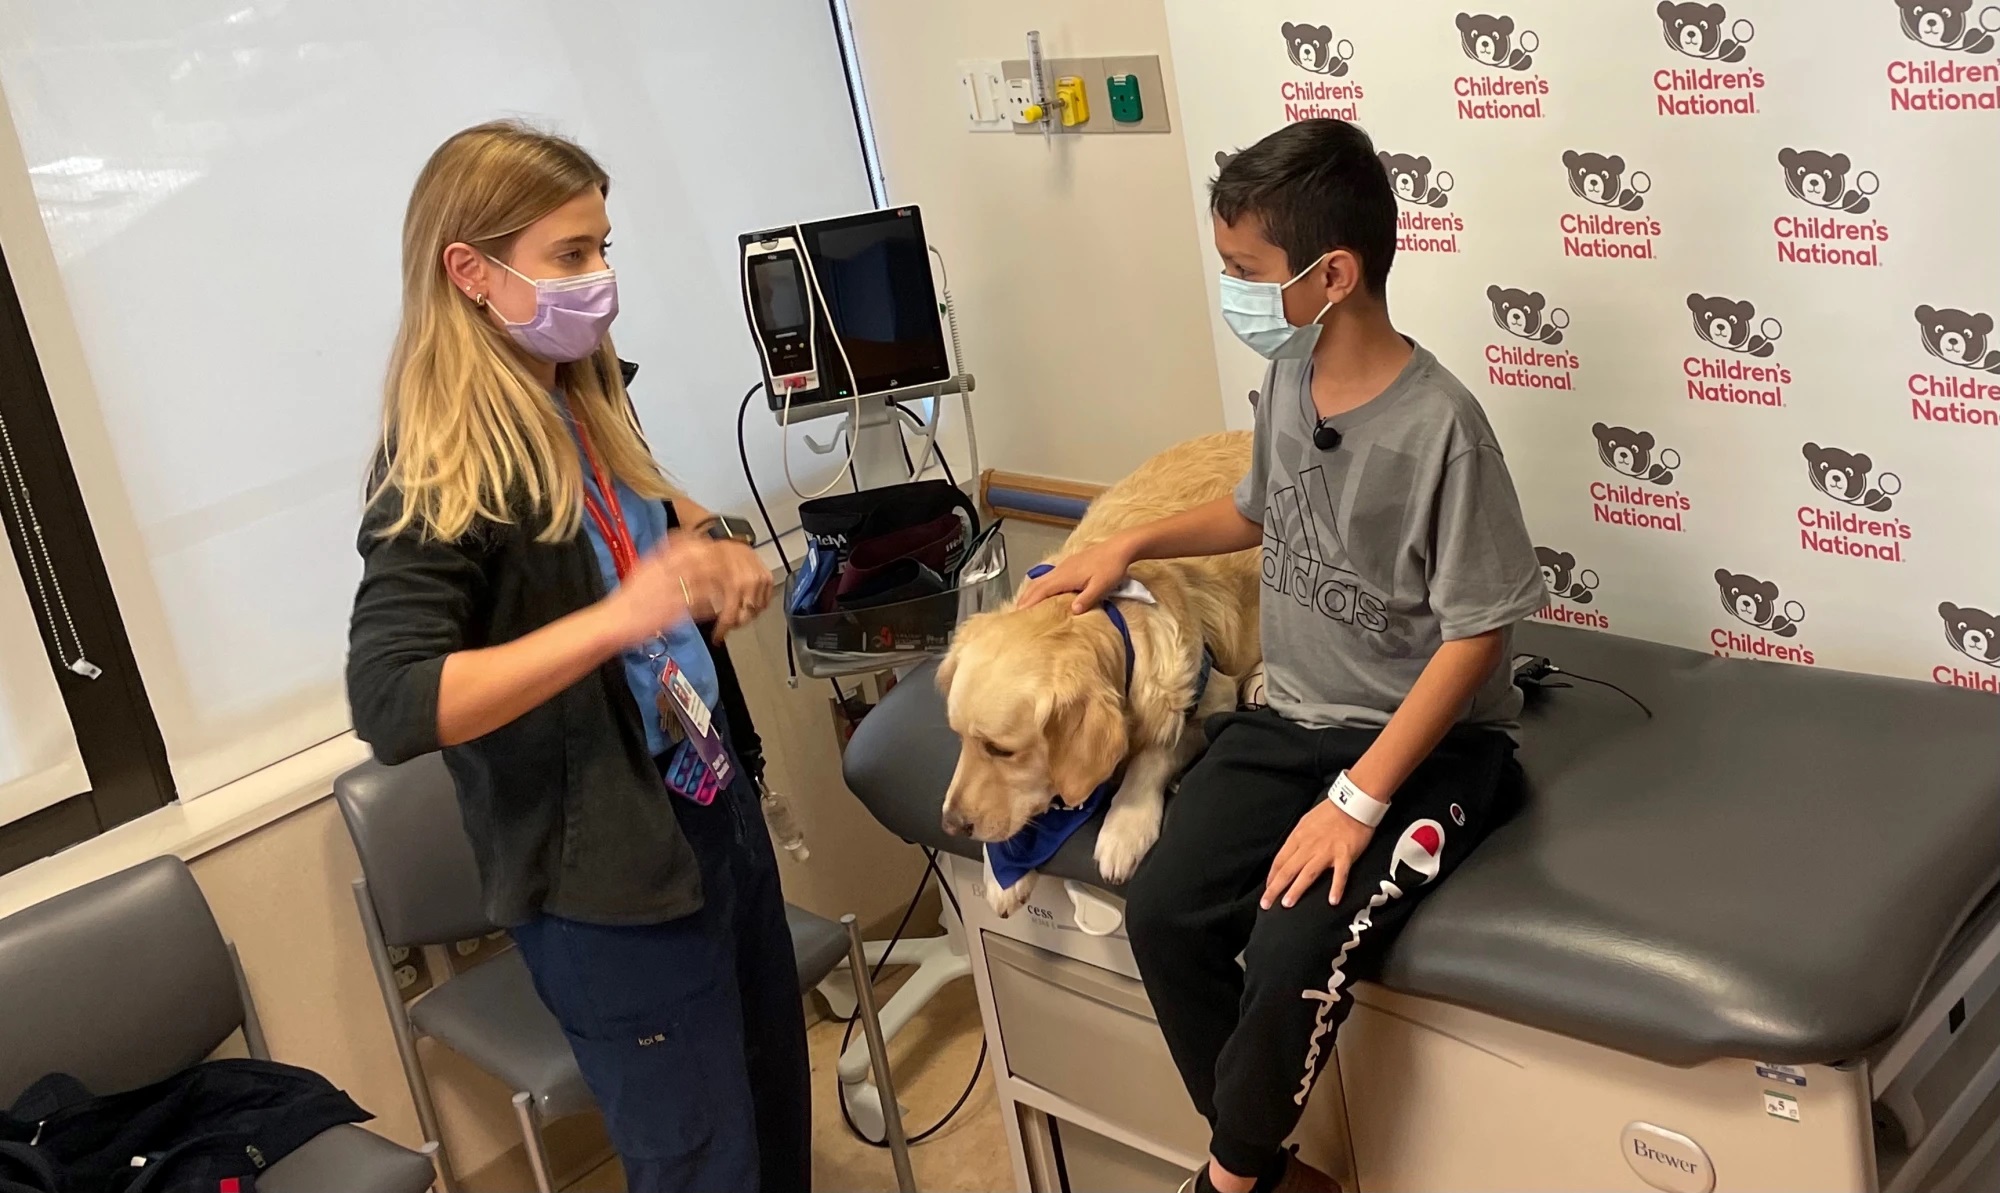 Santiago Esparza, 8, gearing up to receive his first COVID-19 dose of the vaccine with the support of a furry friend at the National Children's Hospital in Washington D.C. Photo:  National Children's Hospital